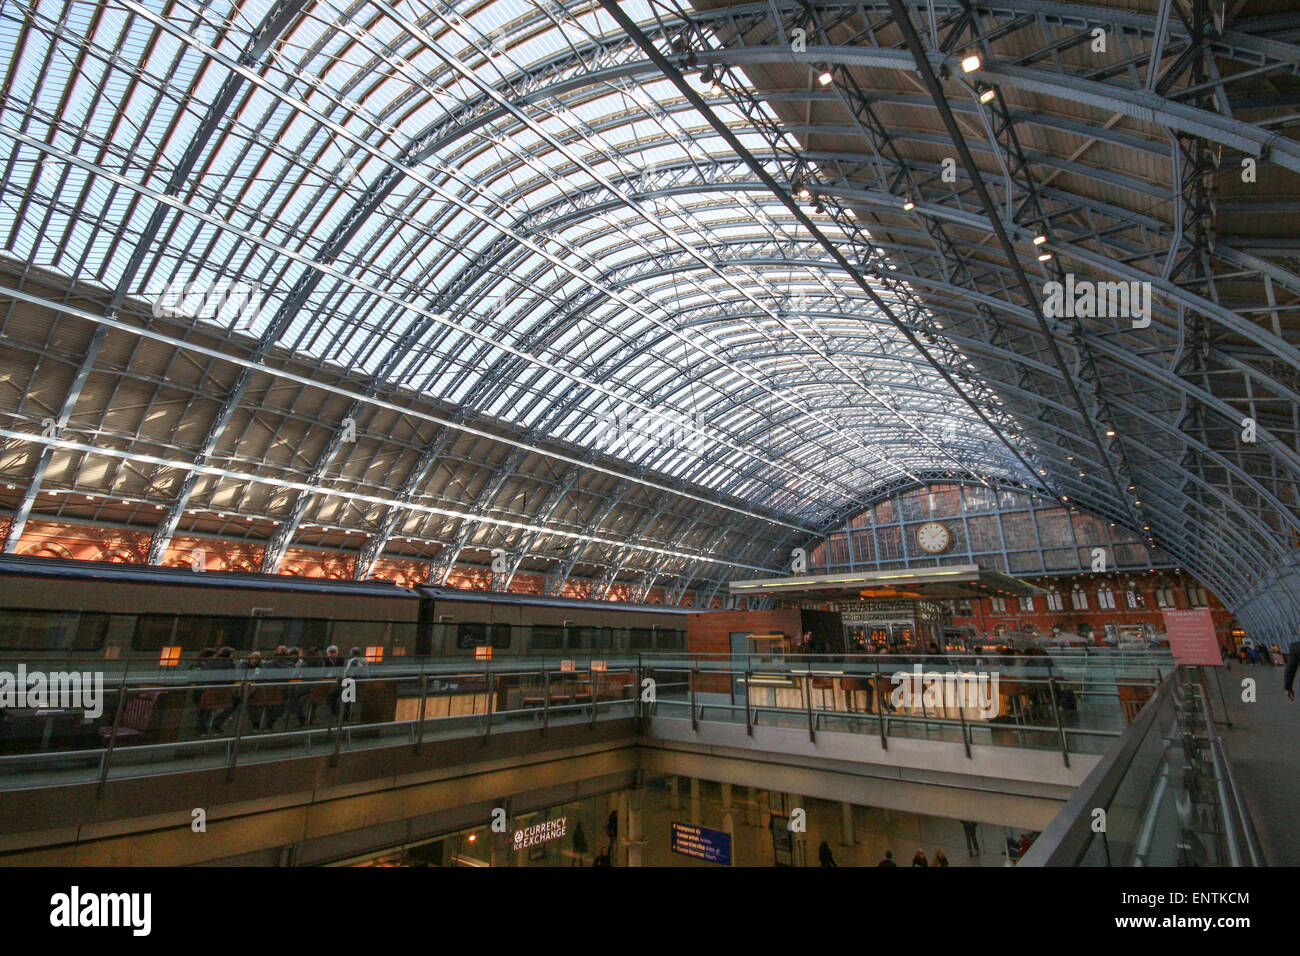 Searcy's Champagne Bar and restaurant in St Pancras International Railway Station London Stock Photo